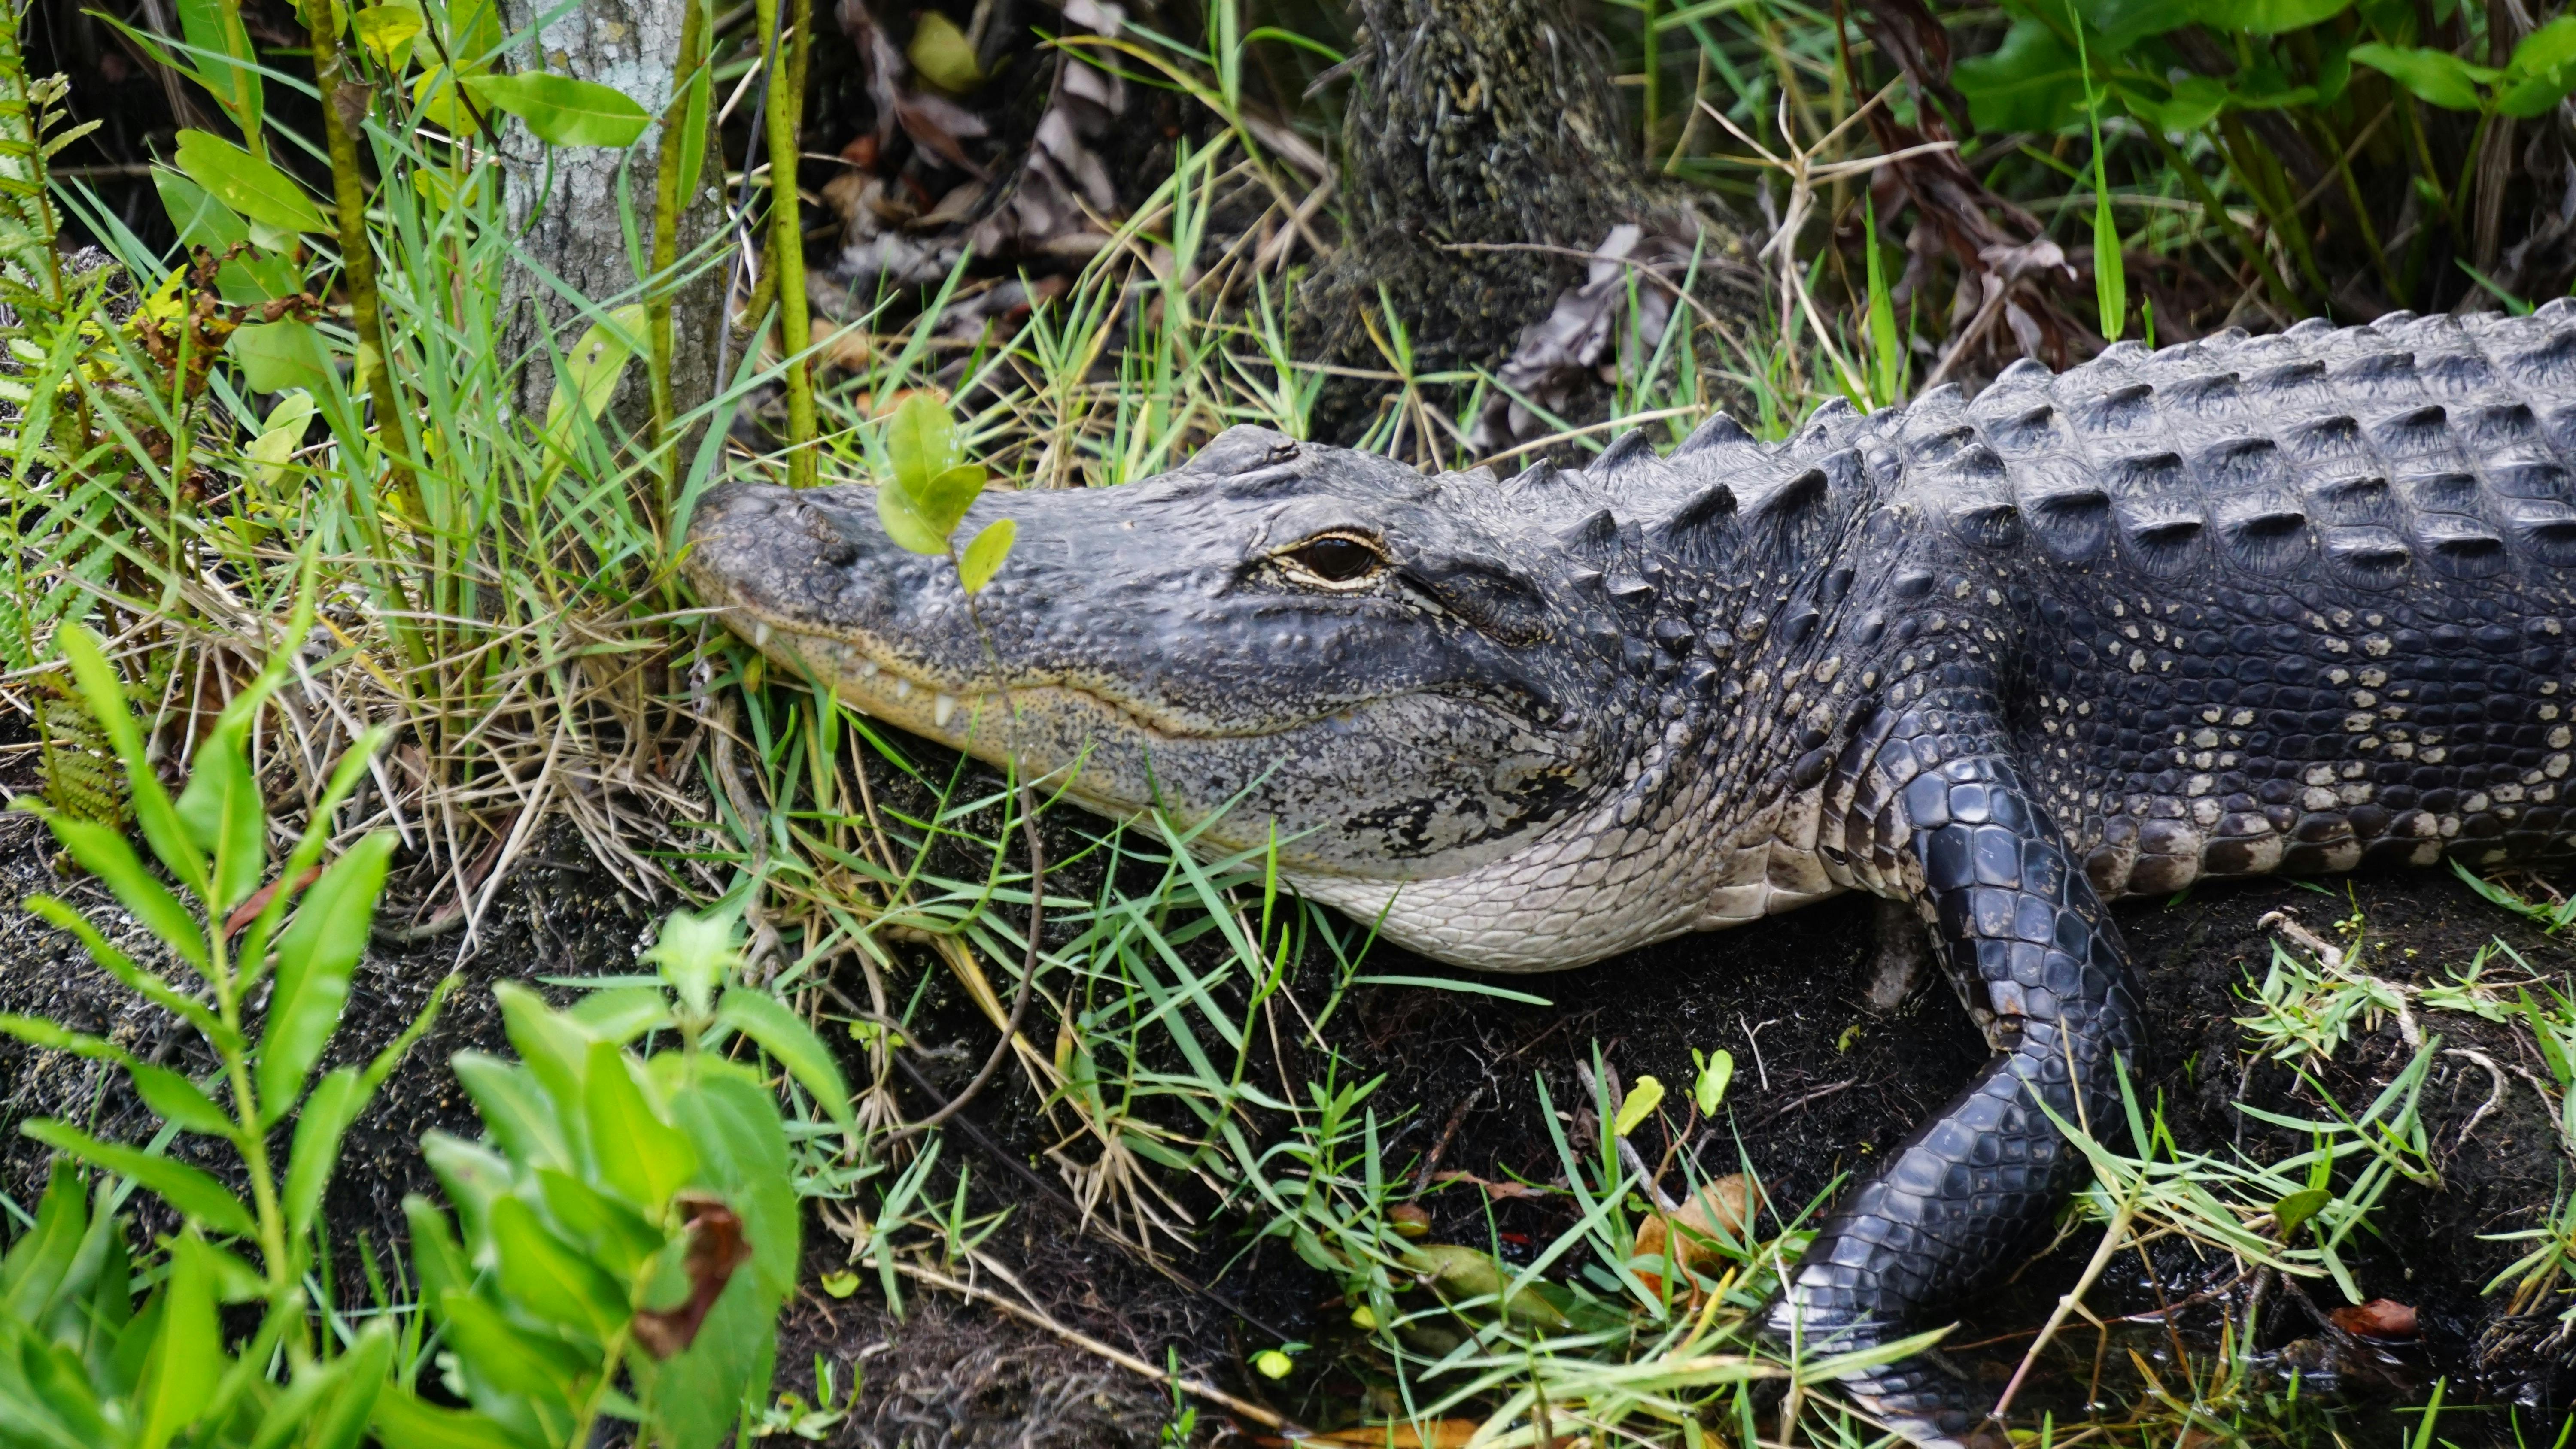 Day trips to the Everglades